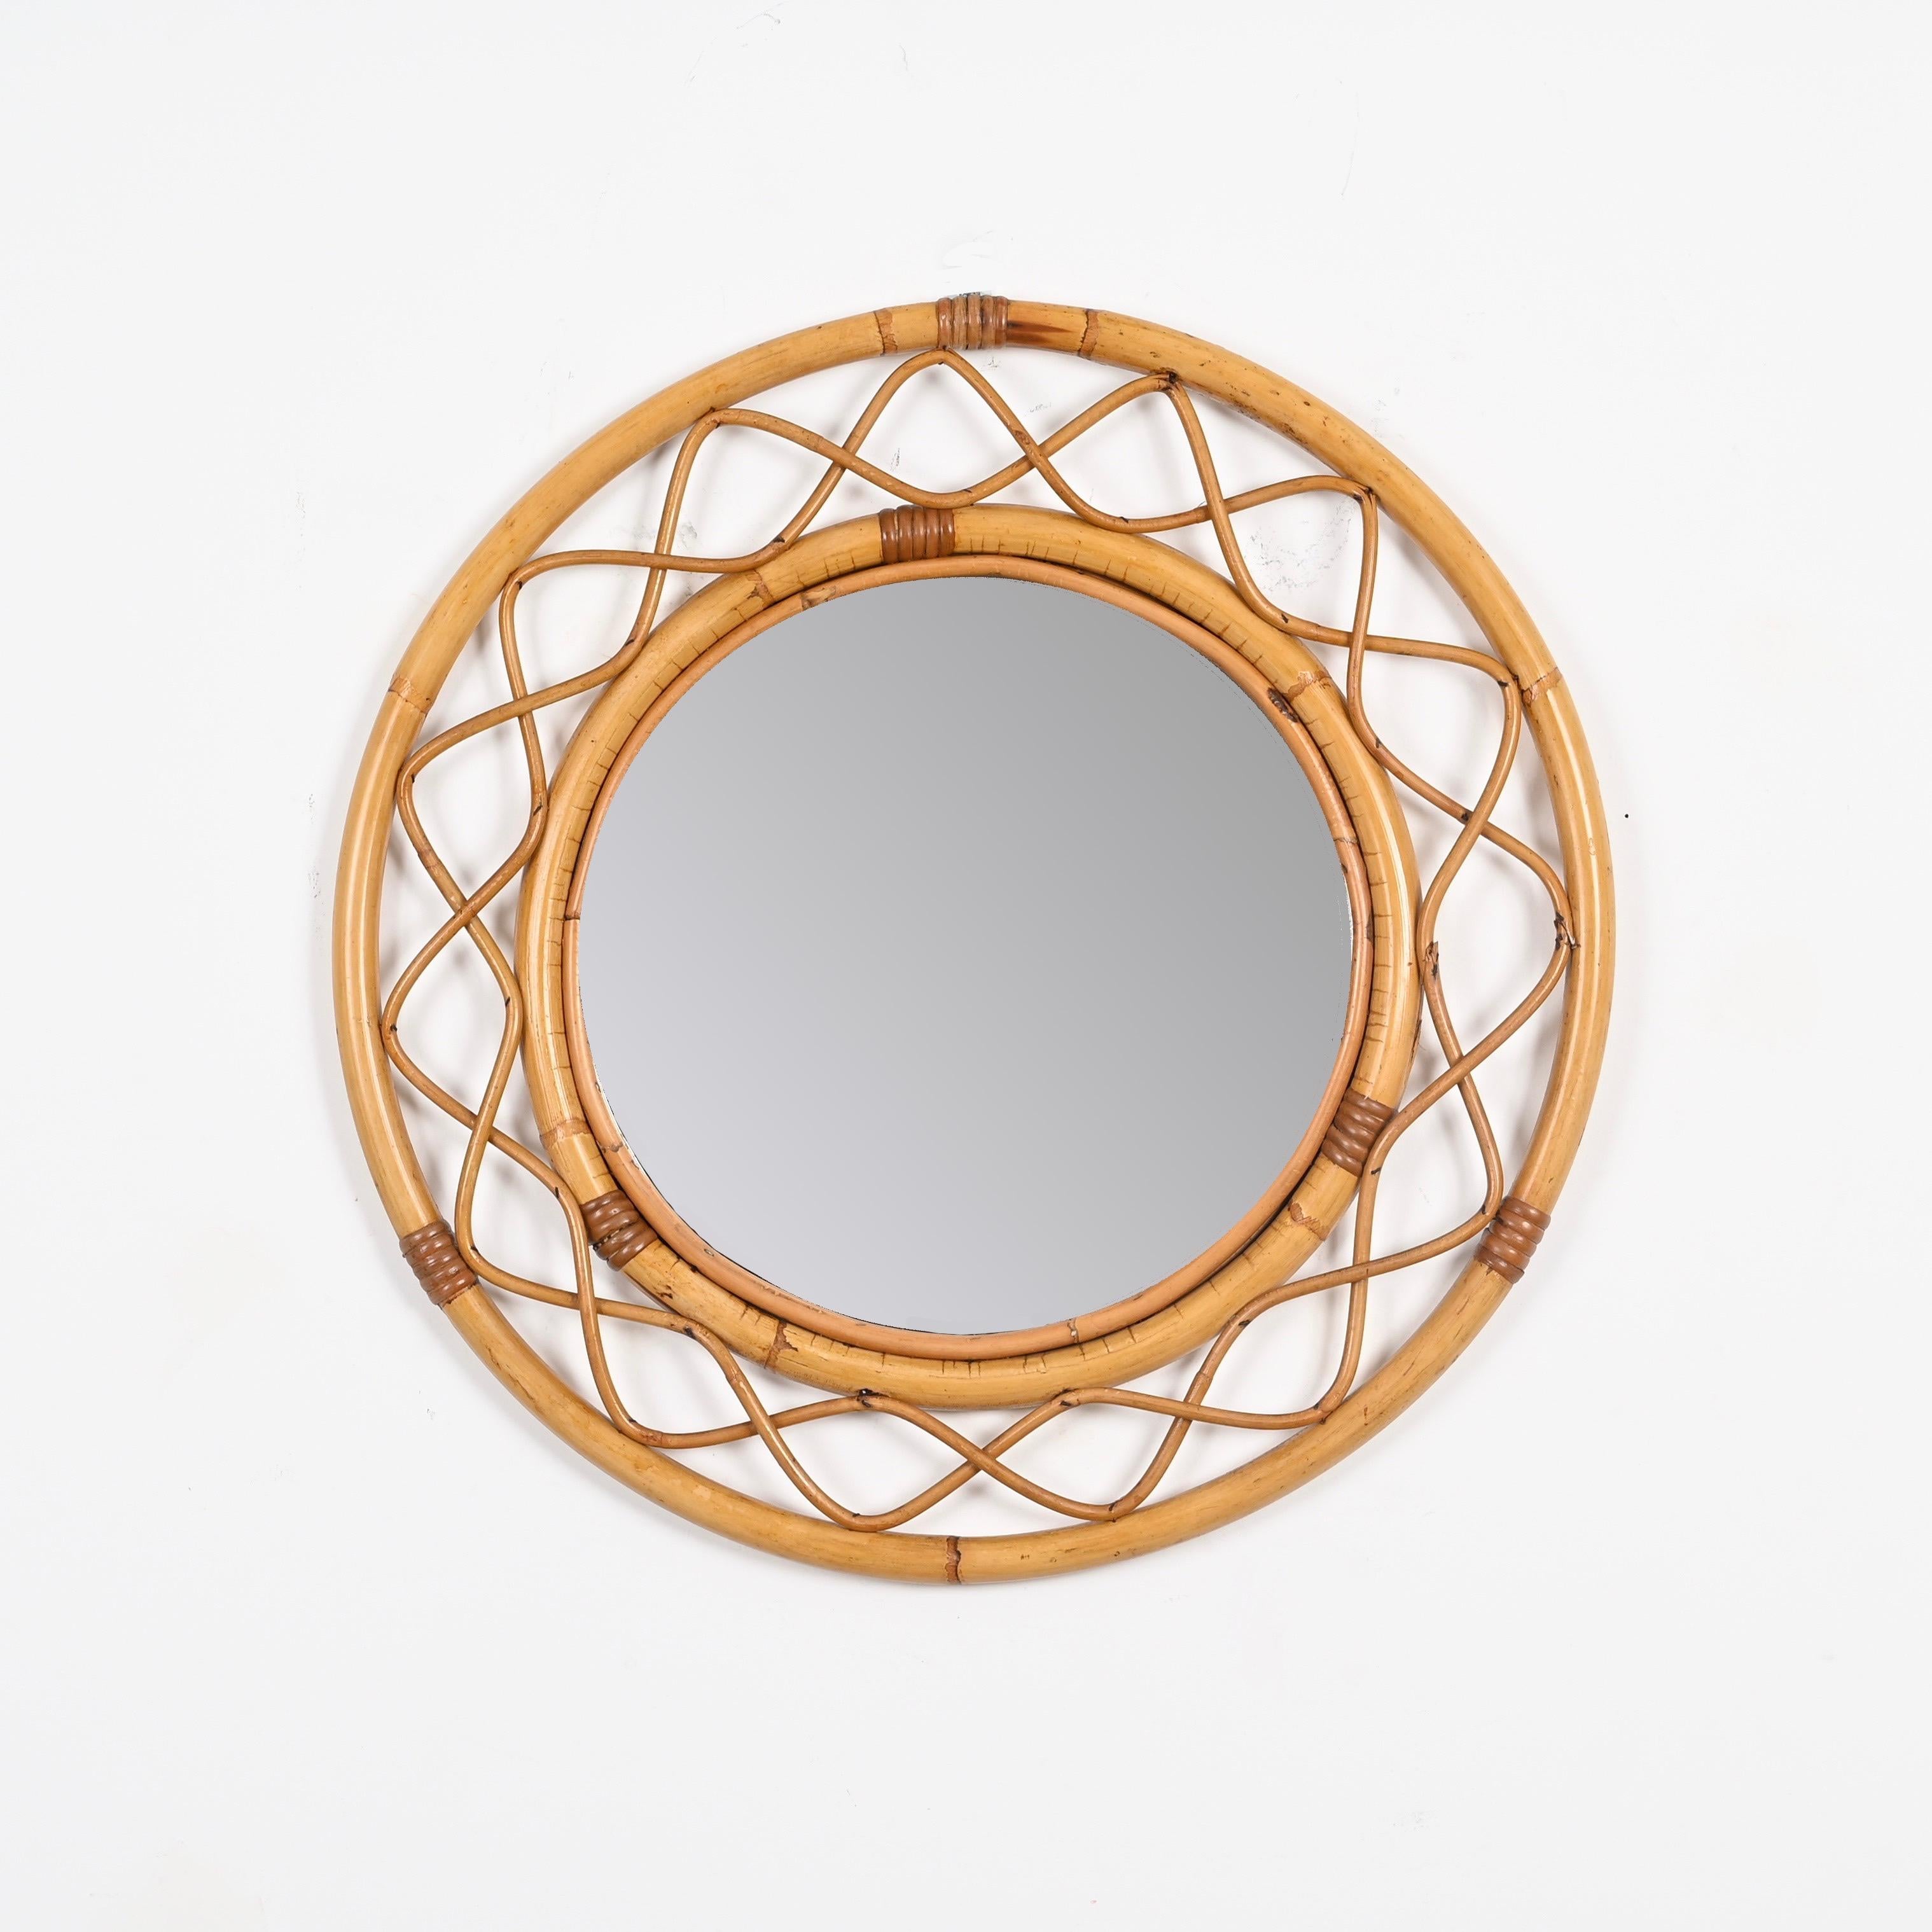 Midcentury Round Italian Mirror, Curved Bamboo, Rattan and Wicker Frame, 1960s In Good Condition For Sale In Roma, IT